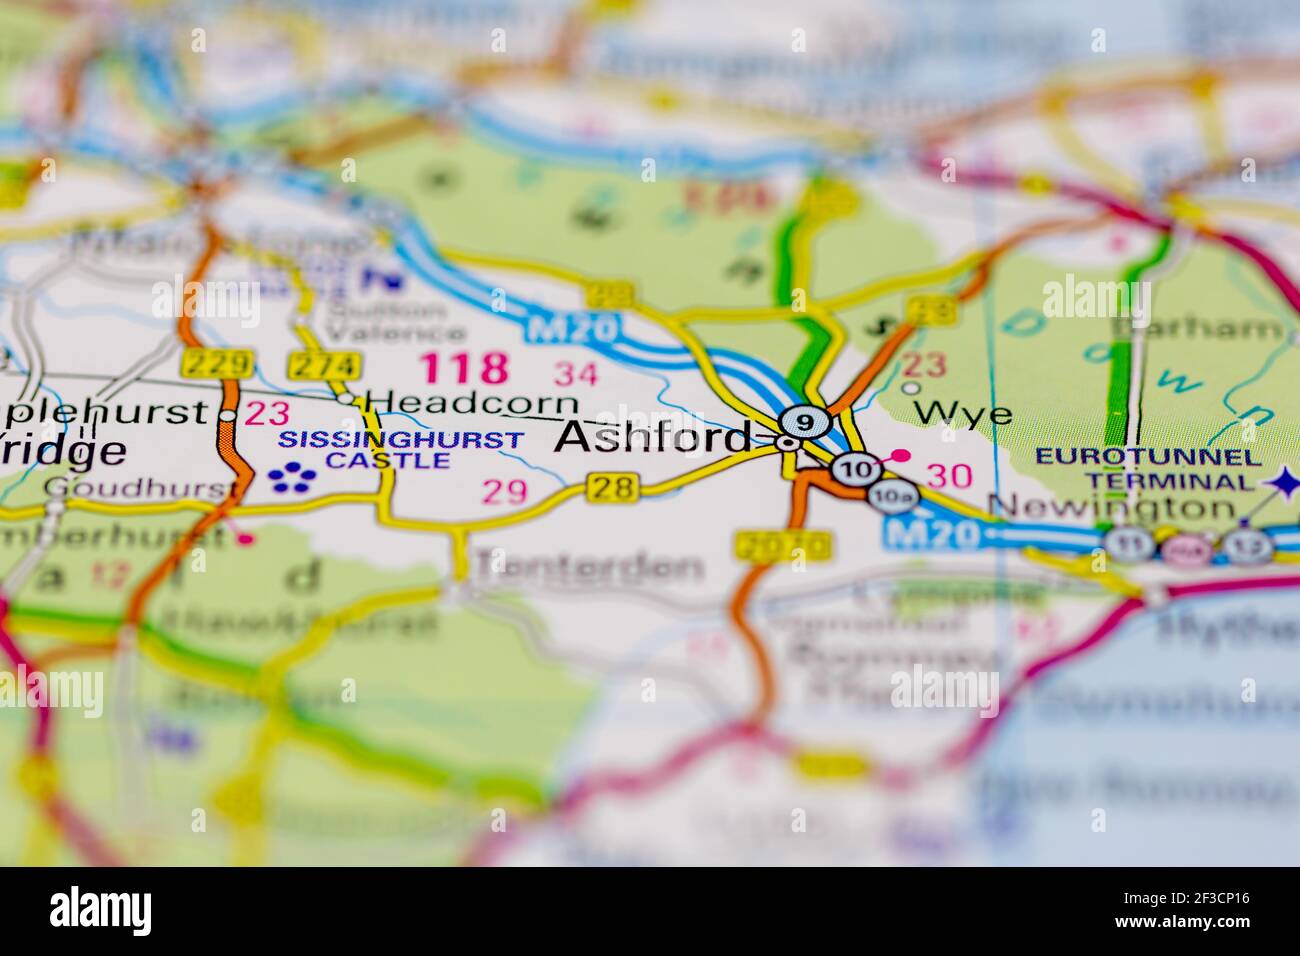 Ashford Shown on a geography map or road map Stock Photo